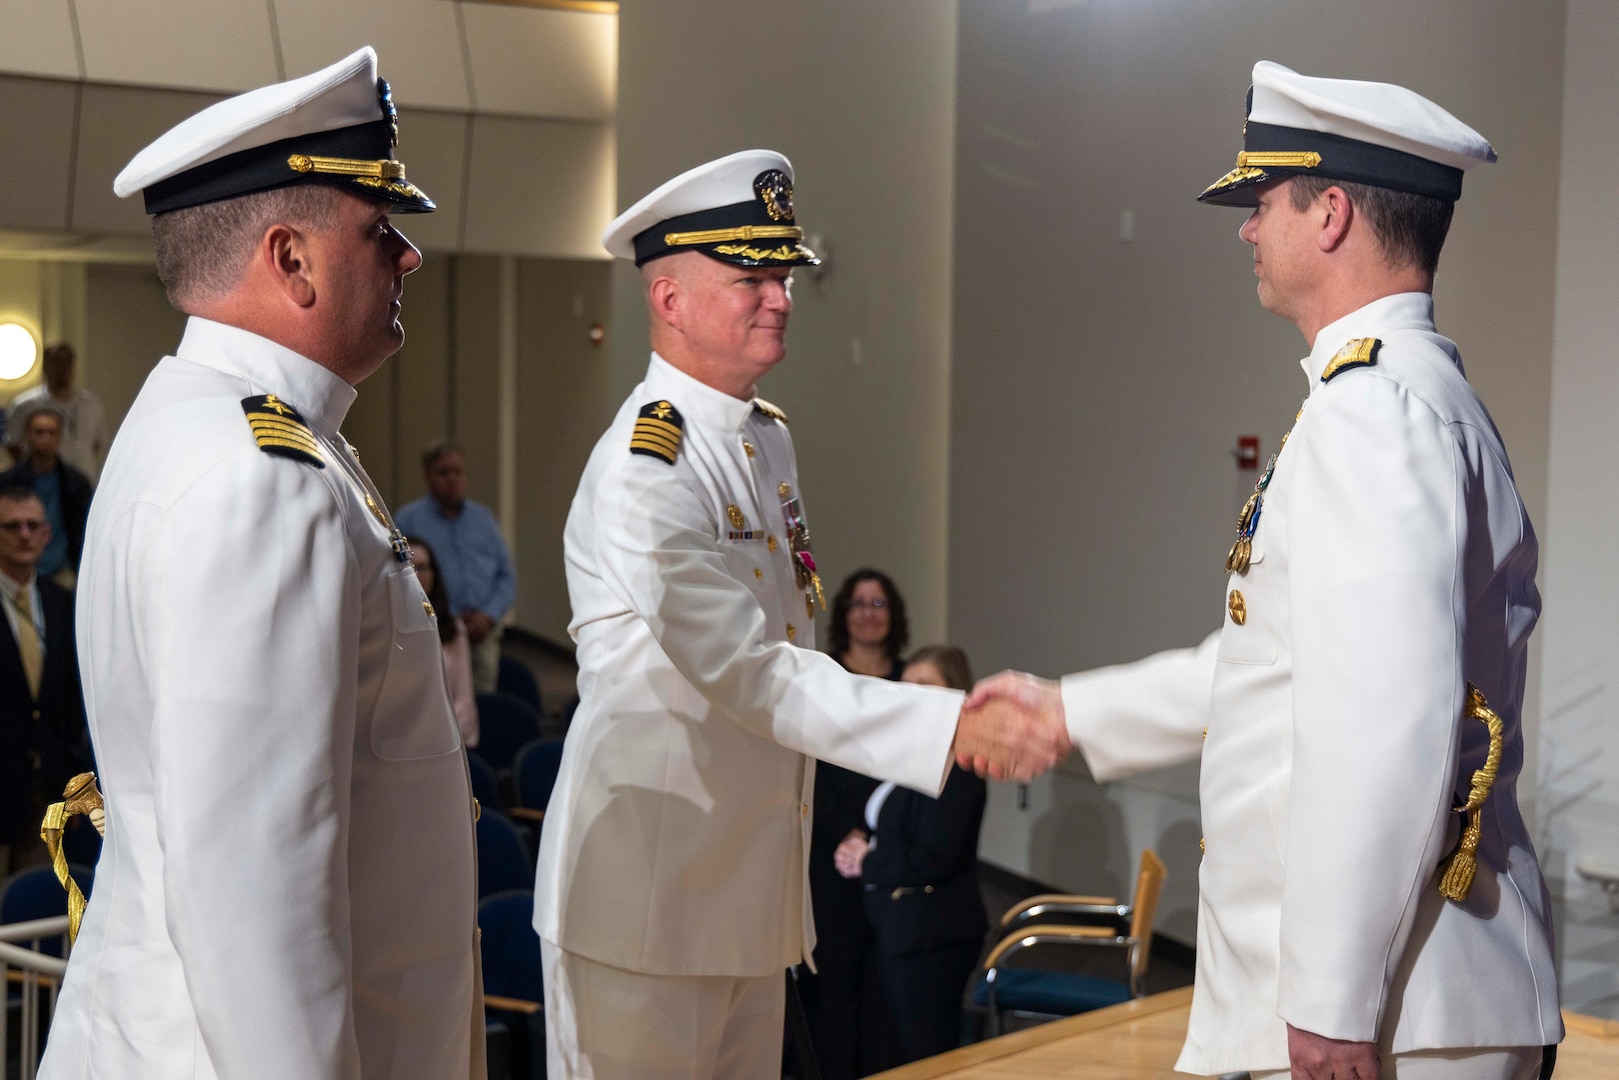 Naval Surface Warfare Center, Carderock Division’s outgoing Commanding Officer, Capt. Todd E. Hutchison (middle) shakes the hand of Rear Adm. Kevin Byrne (right), Commander, Naval Surface Warfare Center and Naval Undersea Warfare Center, while Carderock’s incoming Commanding Officer, Capt. Matthew Tardy (left) stands at attention during a change-of-command ceremony held in West Bethesda, Md., on May 12.  (U.S. Navy photo by Devin Pisner)